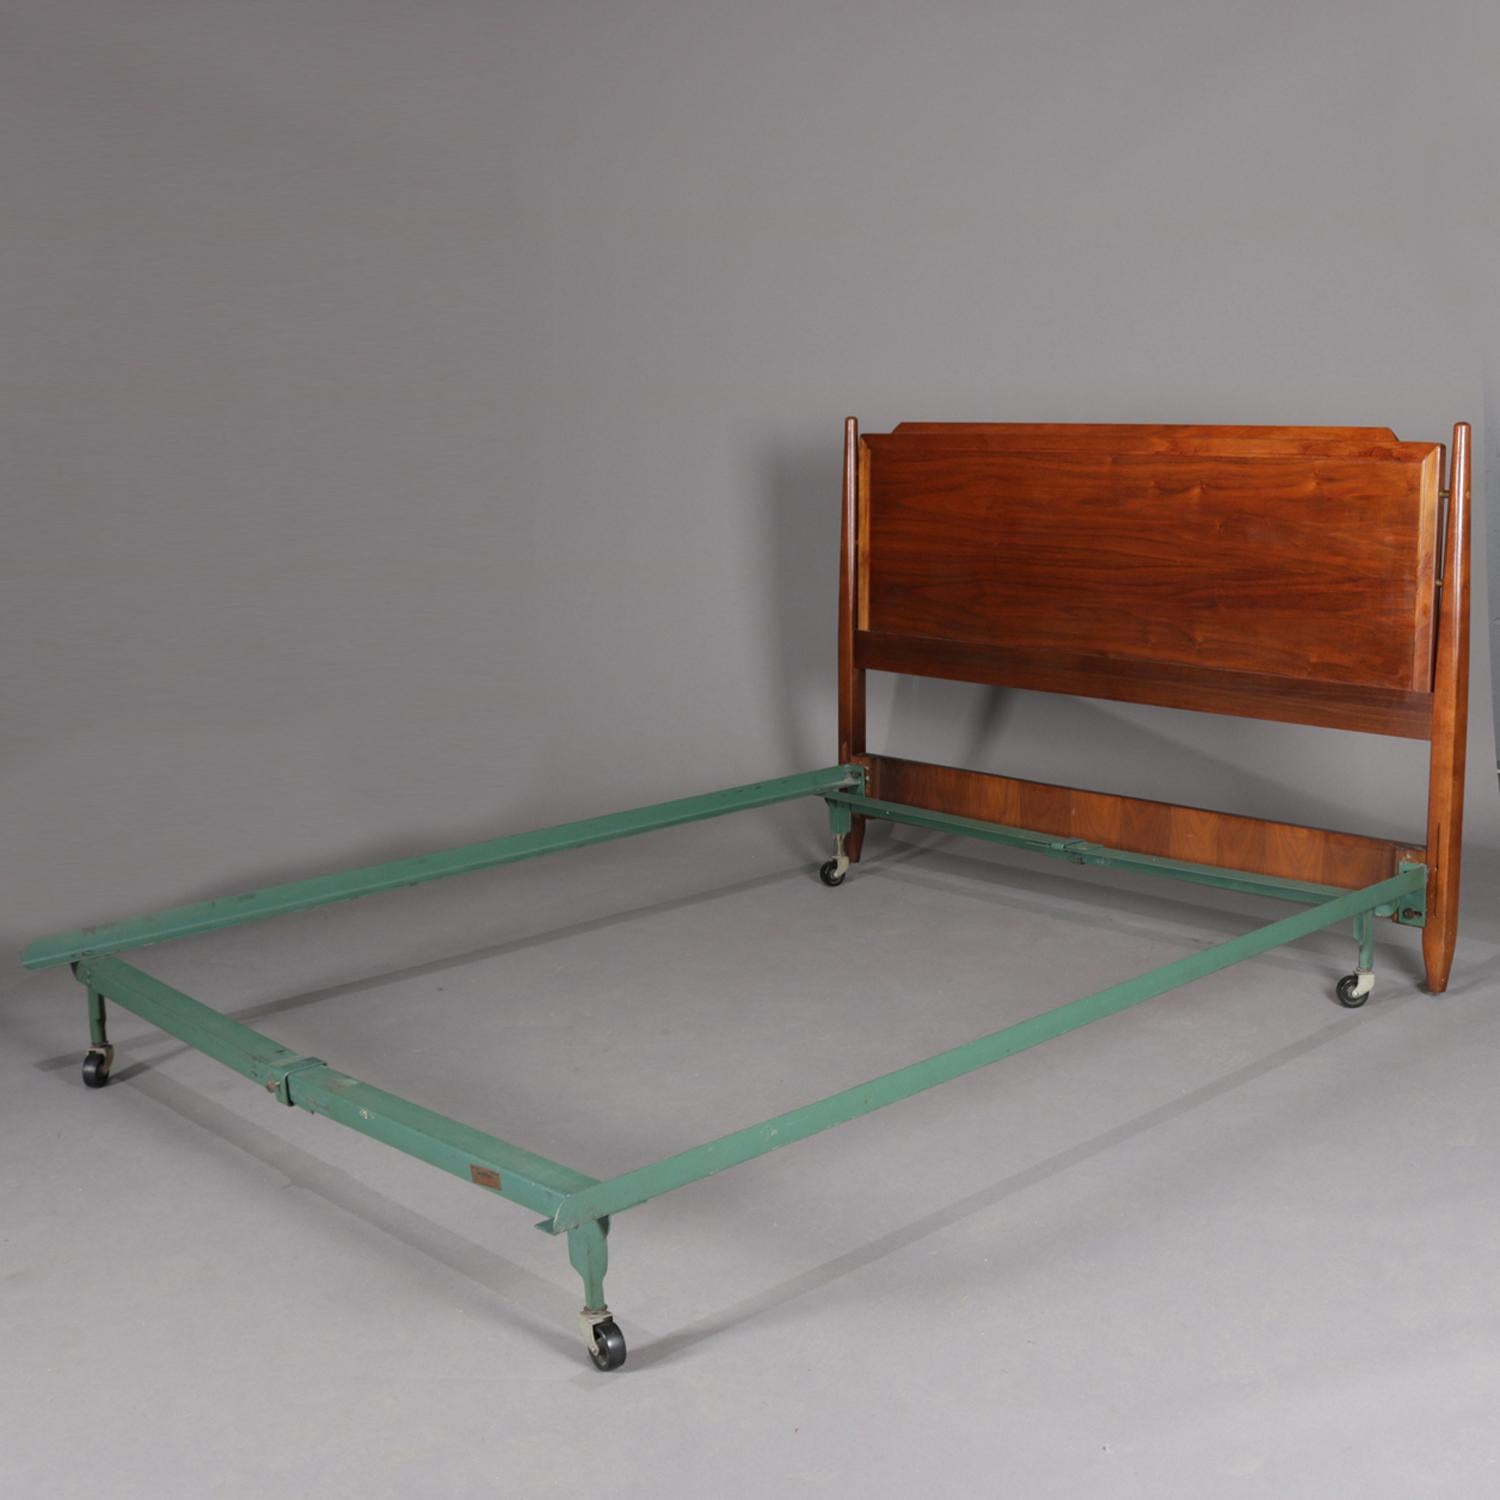 Midcentury Danish modern full/double bed frame features panelled walnut headboard having flanking turned column supports and collapsible metal frame, 20th century.


Measures: 36.5